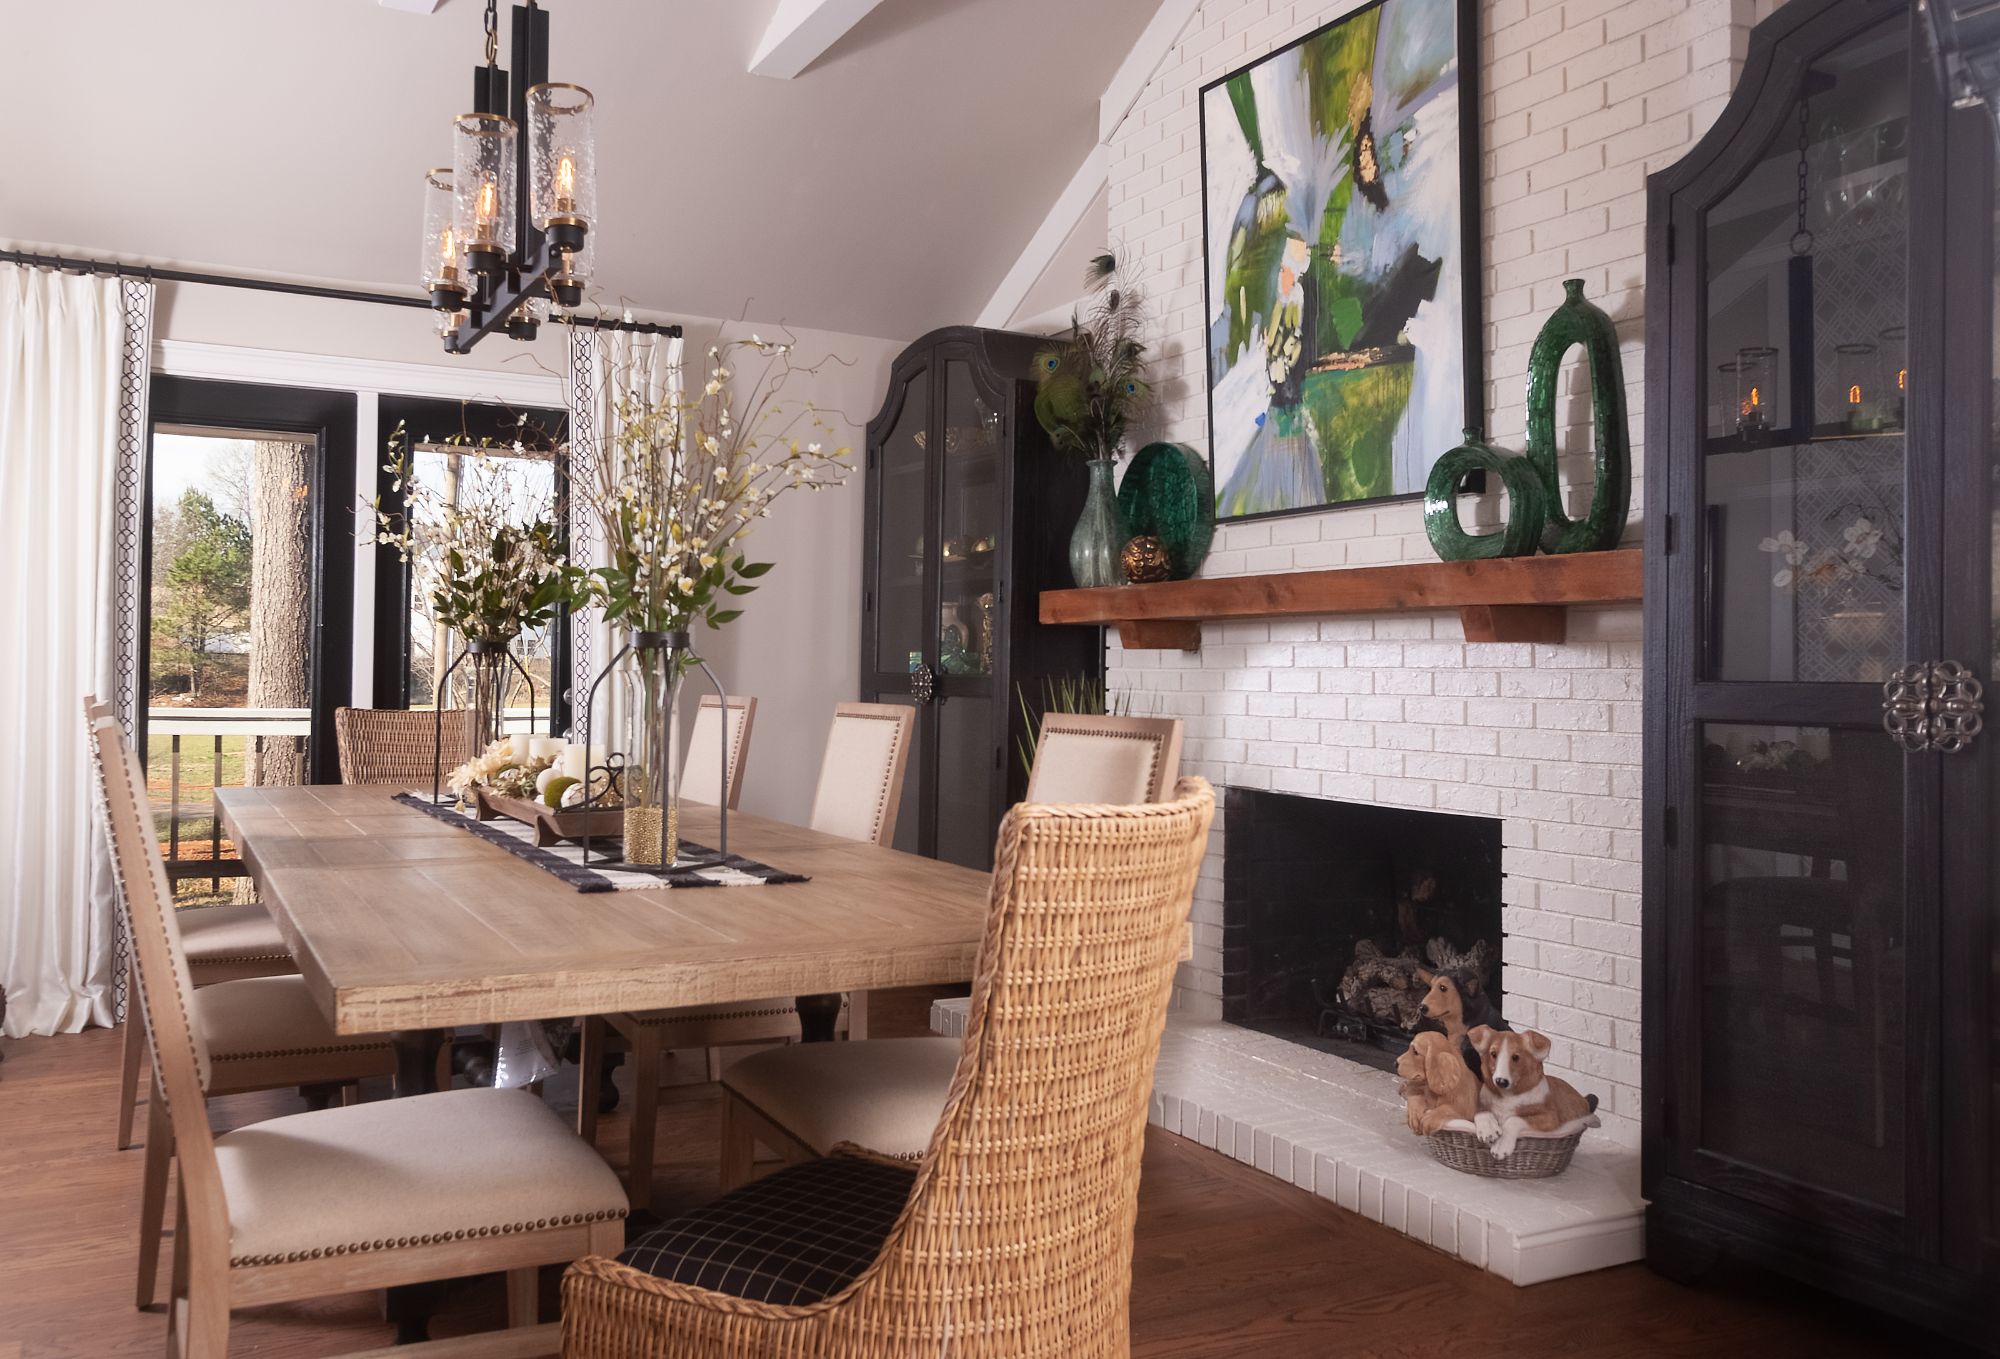 Small dining room details that can make a major statement